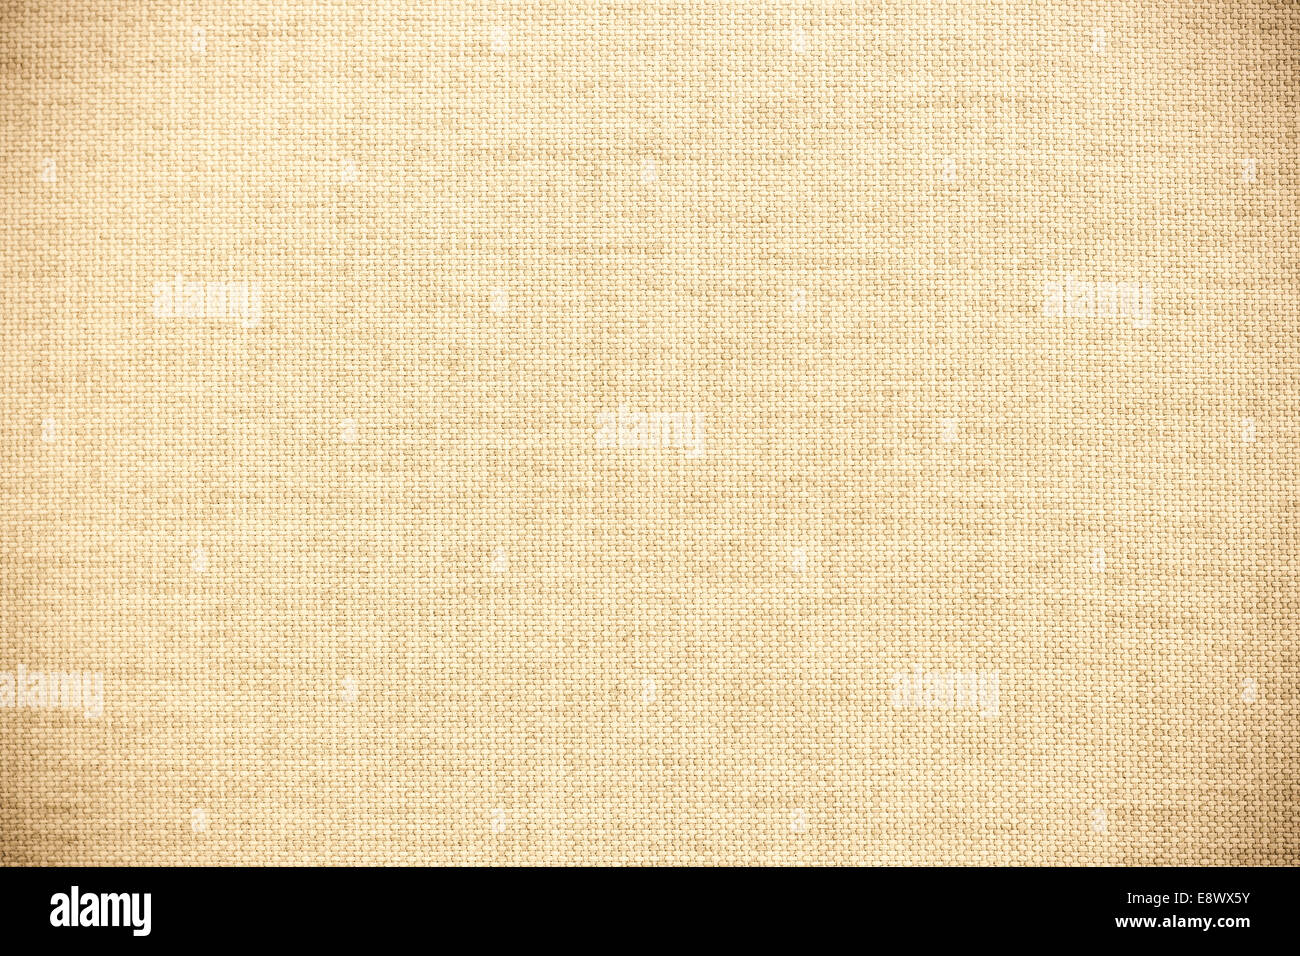 brown fabric texture background Stock Photo